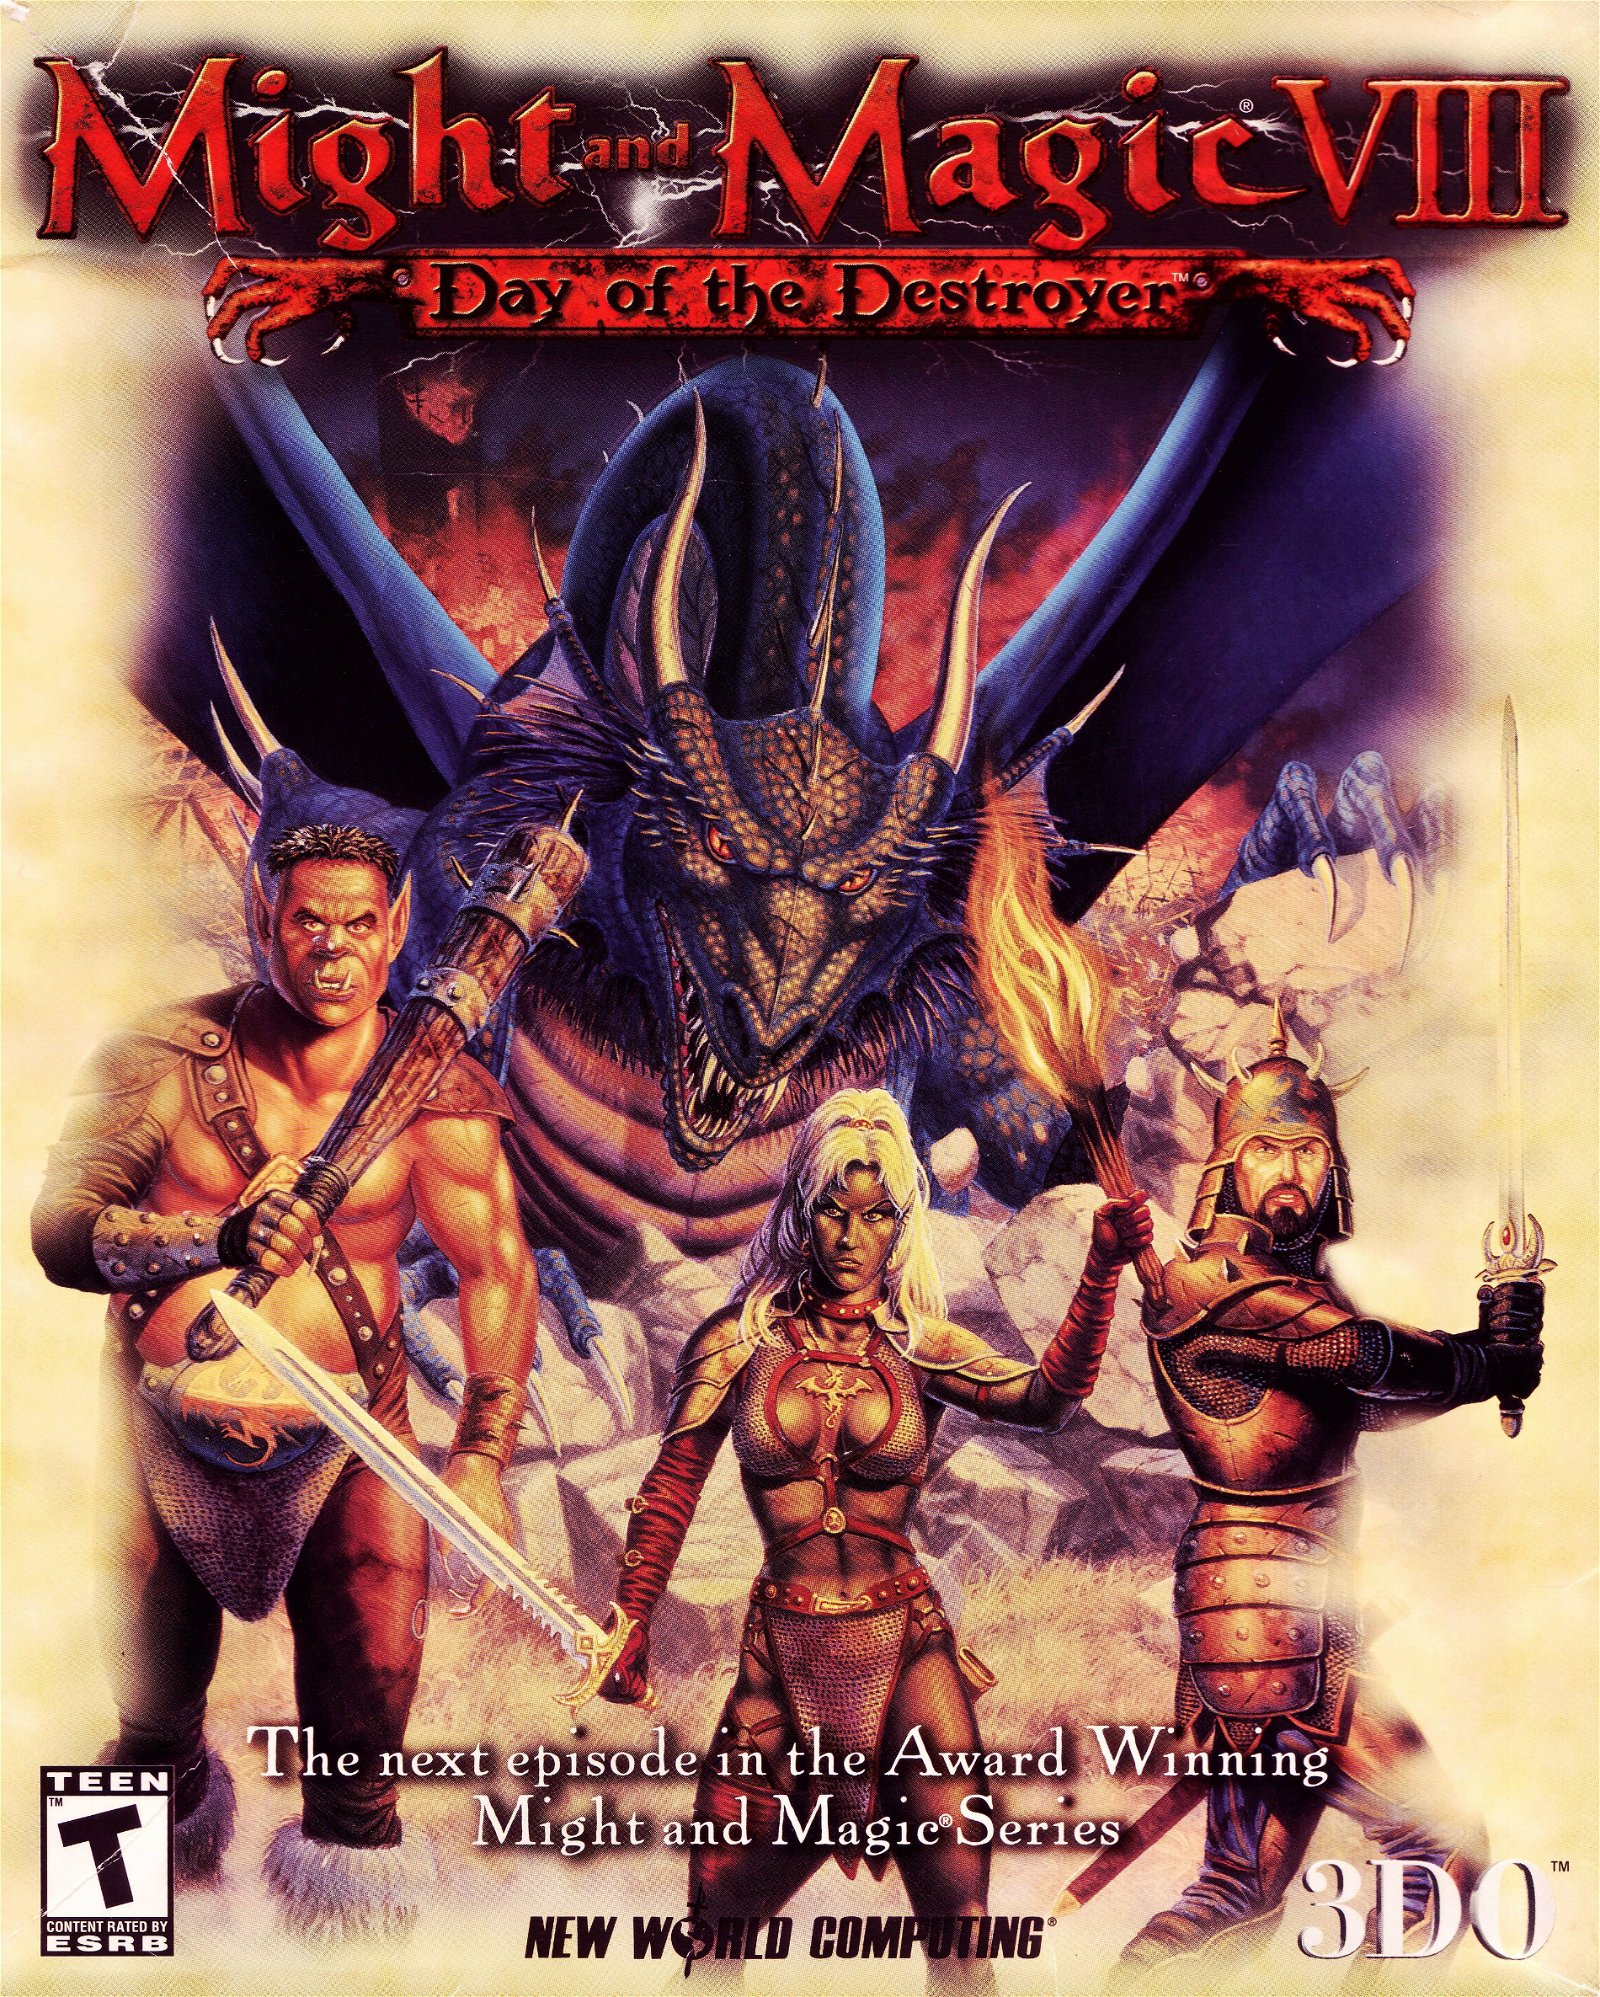 Image of Might and Magic VIII: Day of the Destroyer